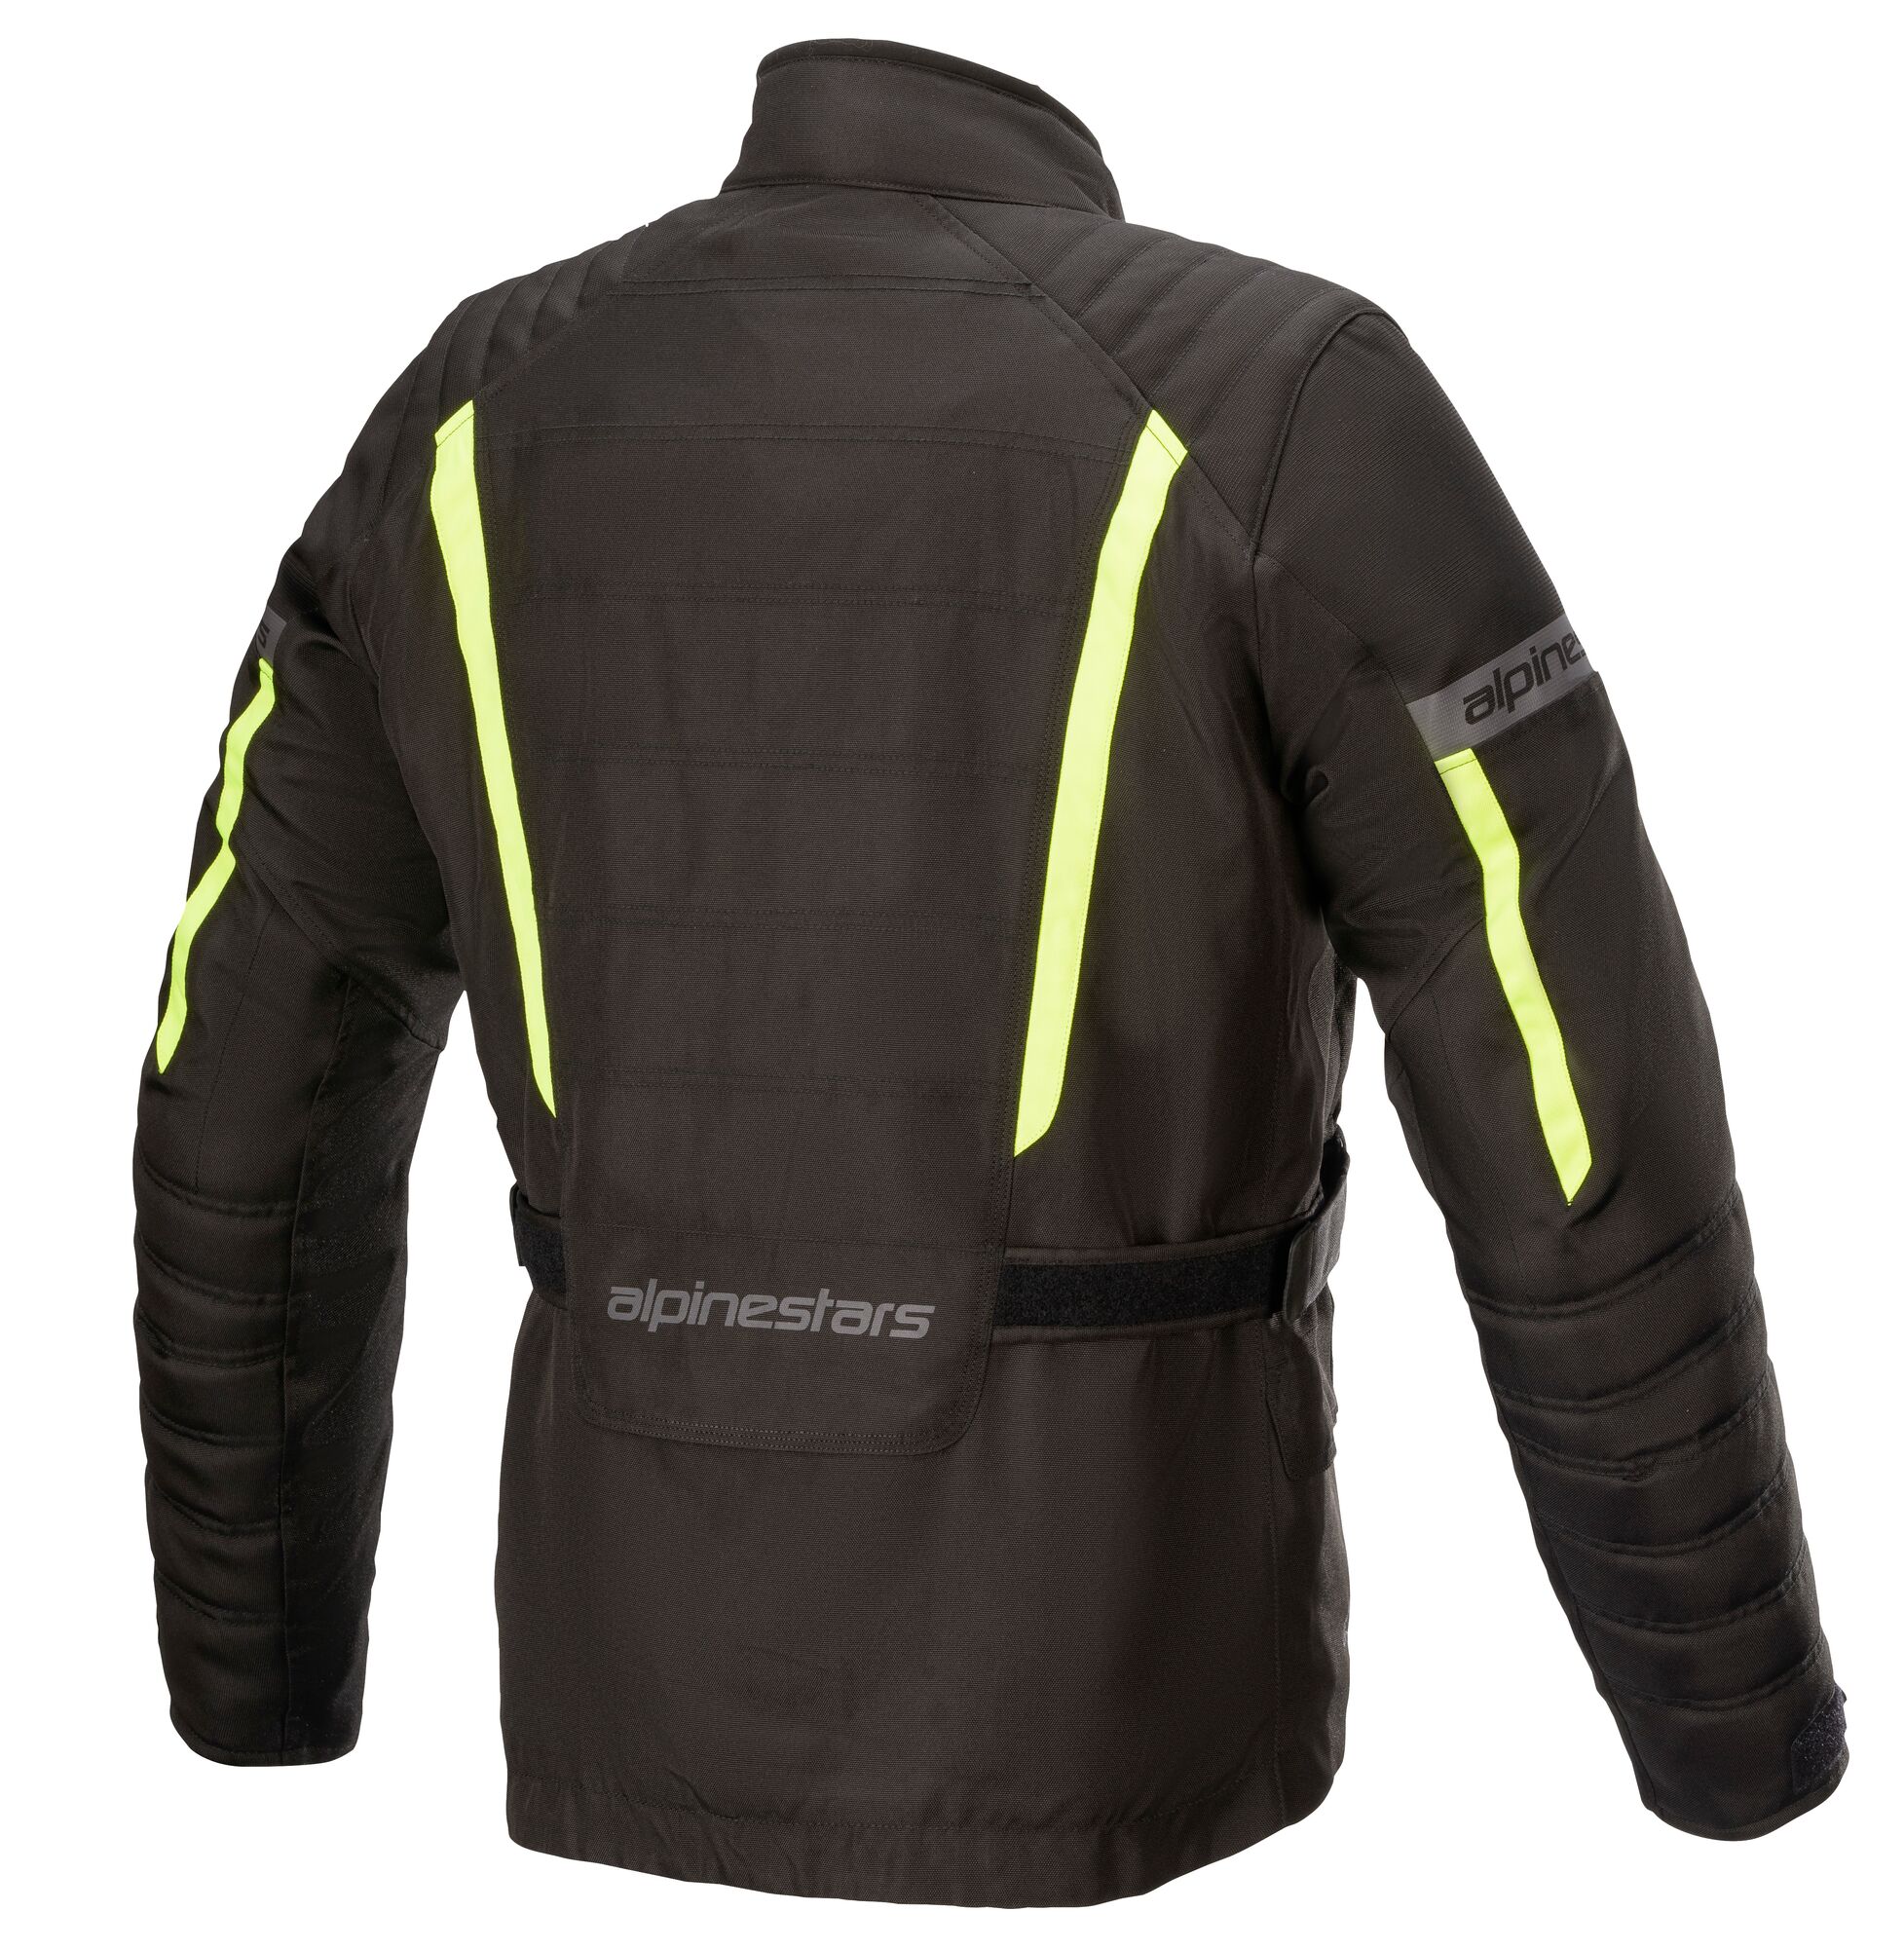 Viewing Images For Alpinestars Gravity Drystar Jacket